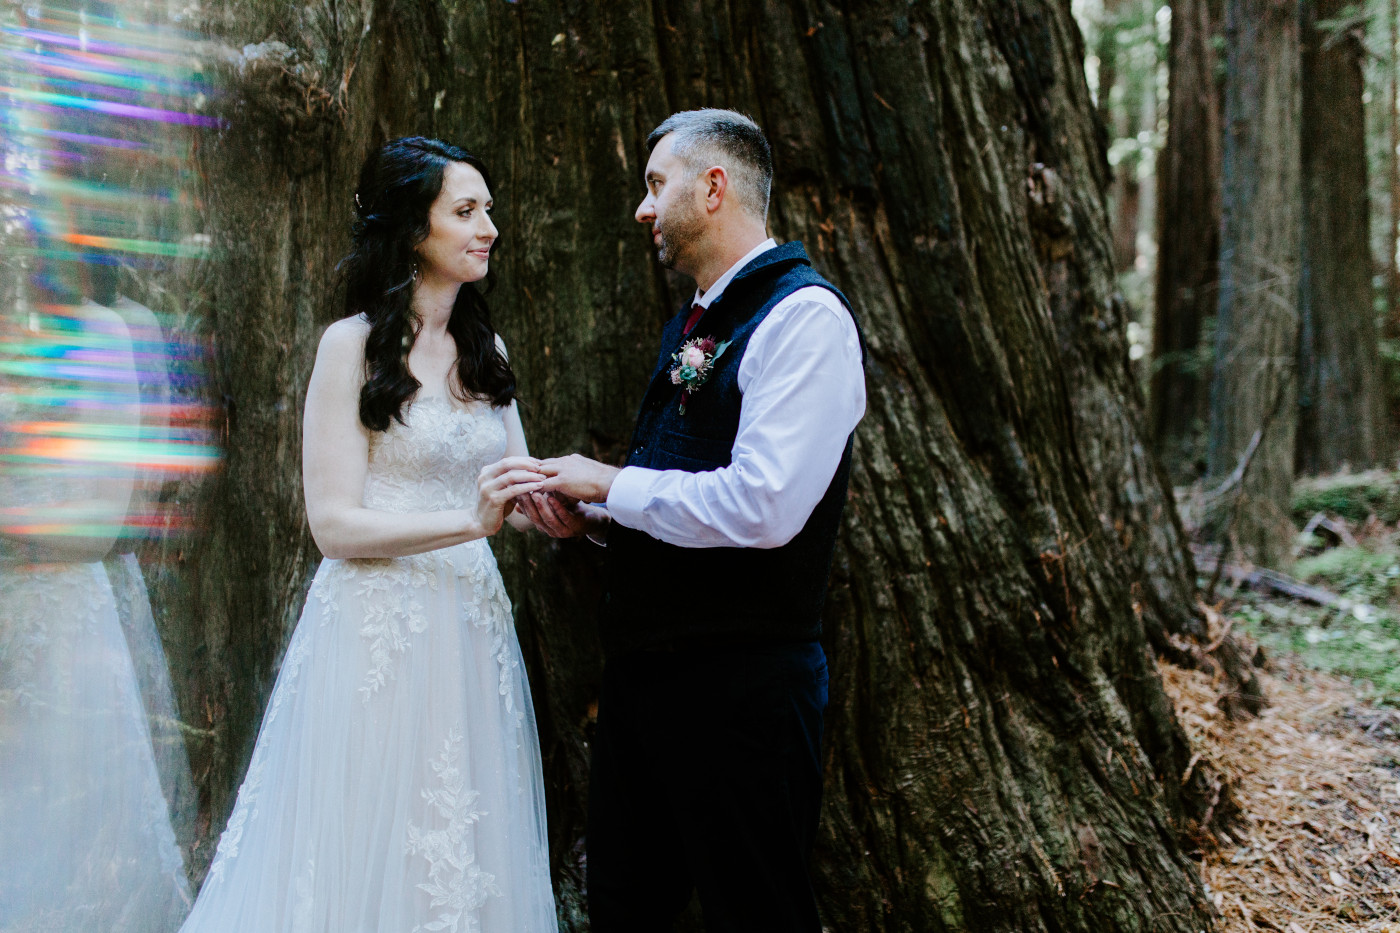 Hannah and Tim hold hands at their elopement.